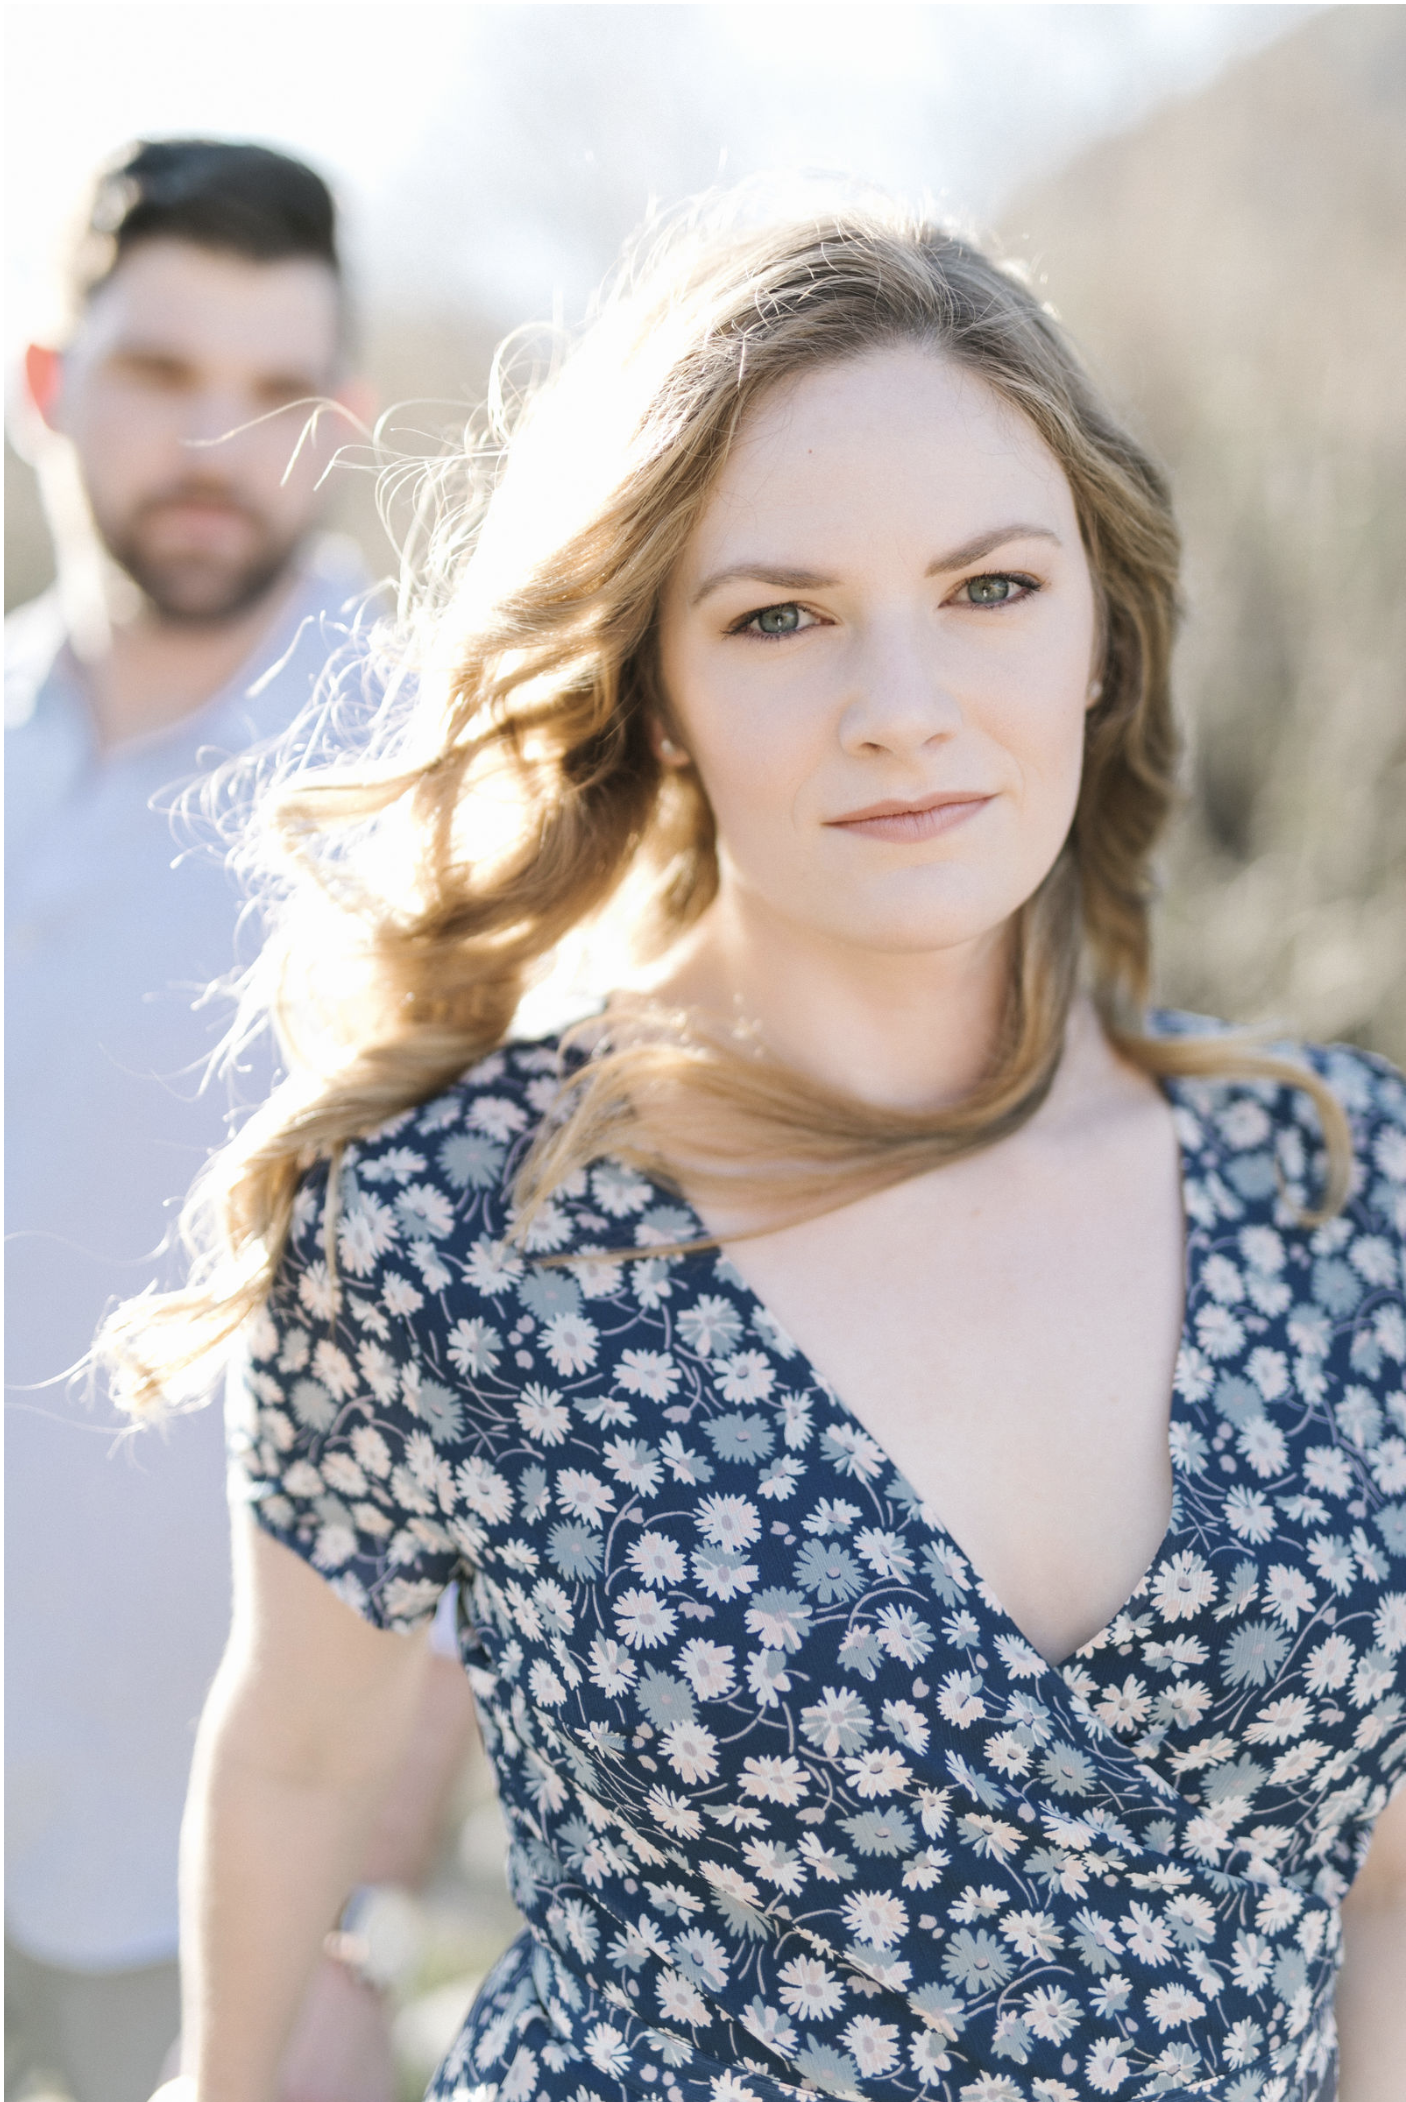 A beautiful engagement shoot on the Salt River in the Arizona desert. Enjoy it on the blog now! #EngagementPhotographyIdeas #ArizonaWeddingPhotography #TheSaltRiverInArizona #TheArizonaDesert #EngagementPortraitIdeas